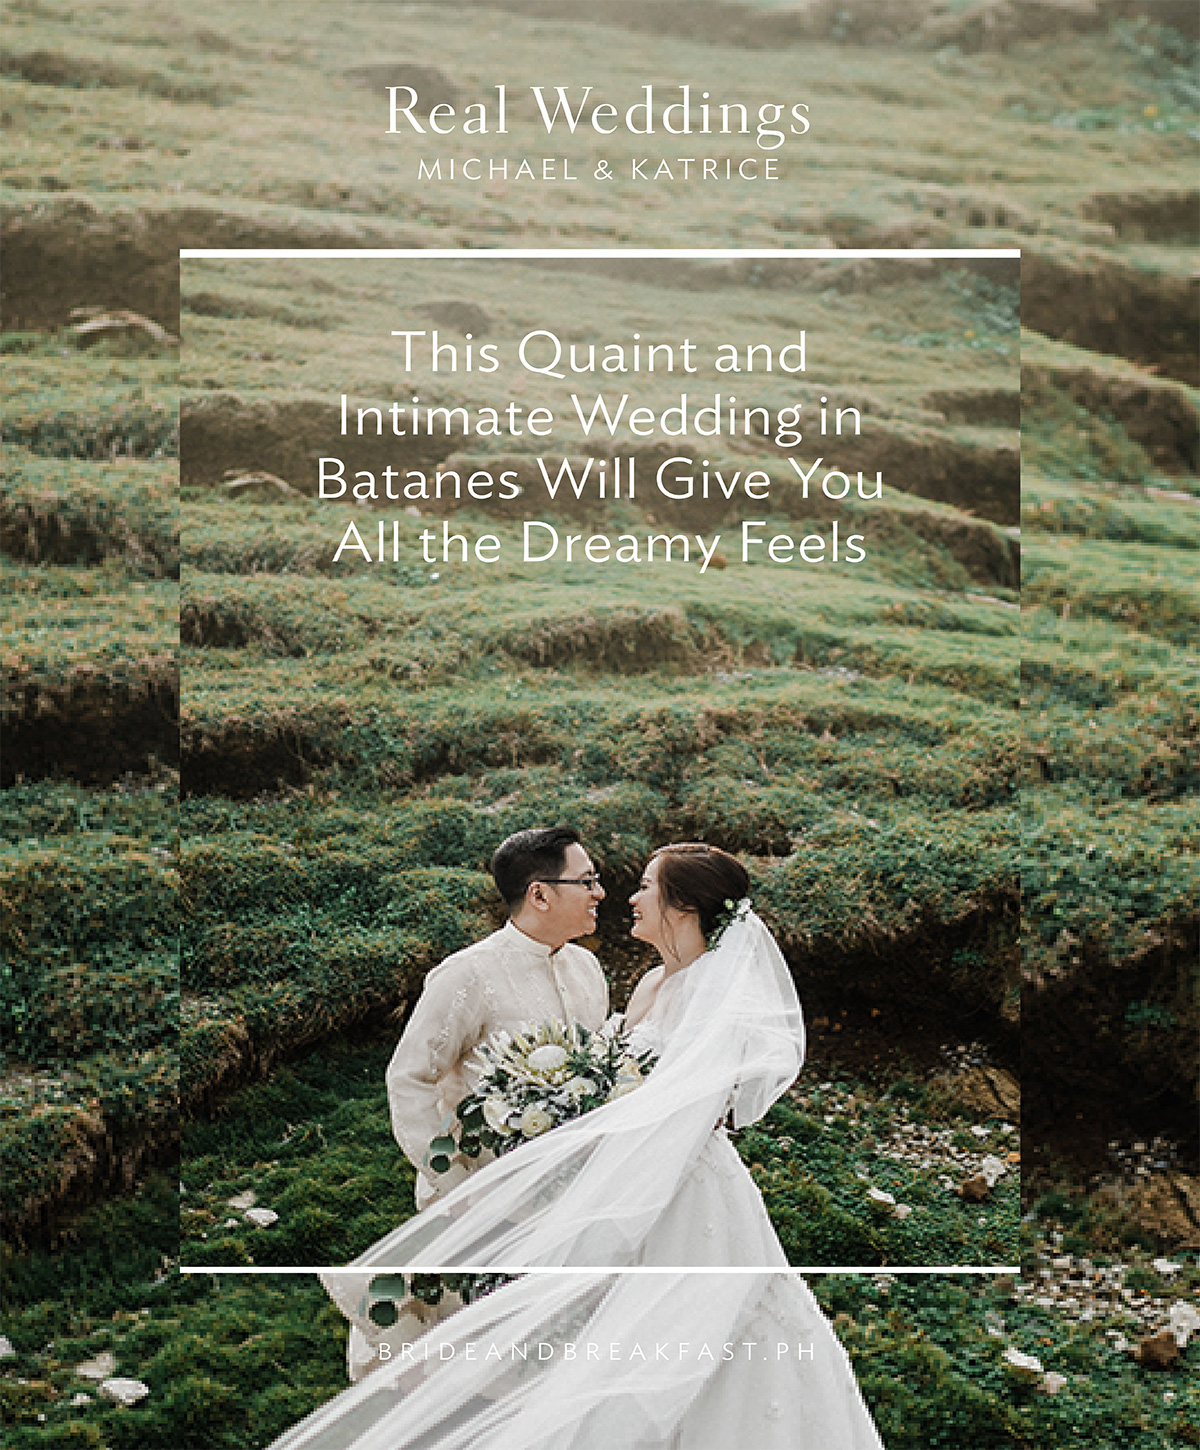 This Quaint and Intimate Wedding in Batanes Will Give You All the Dreamy Feels